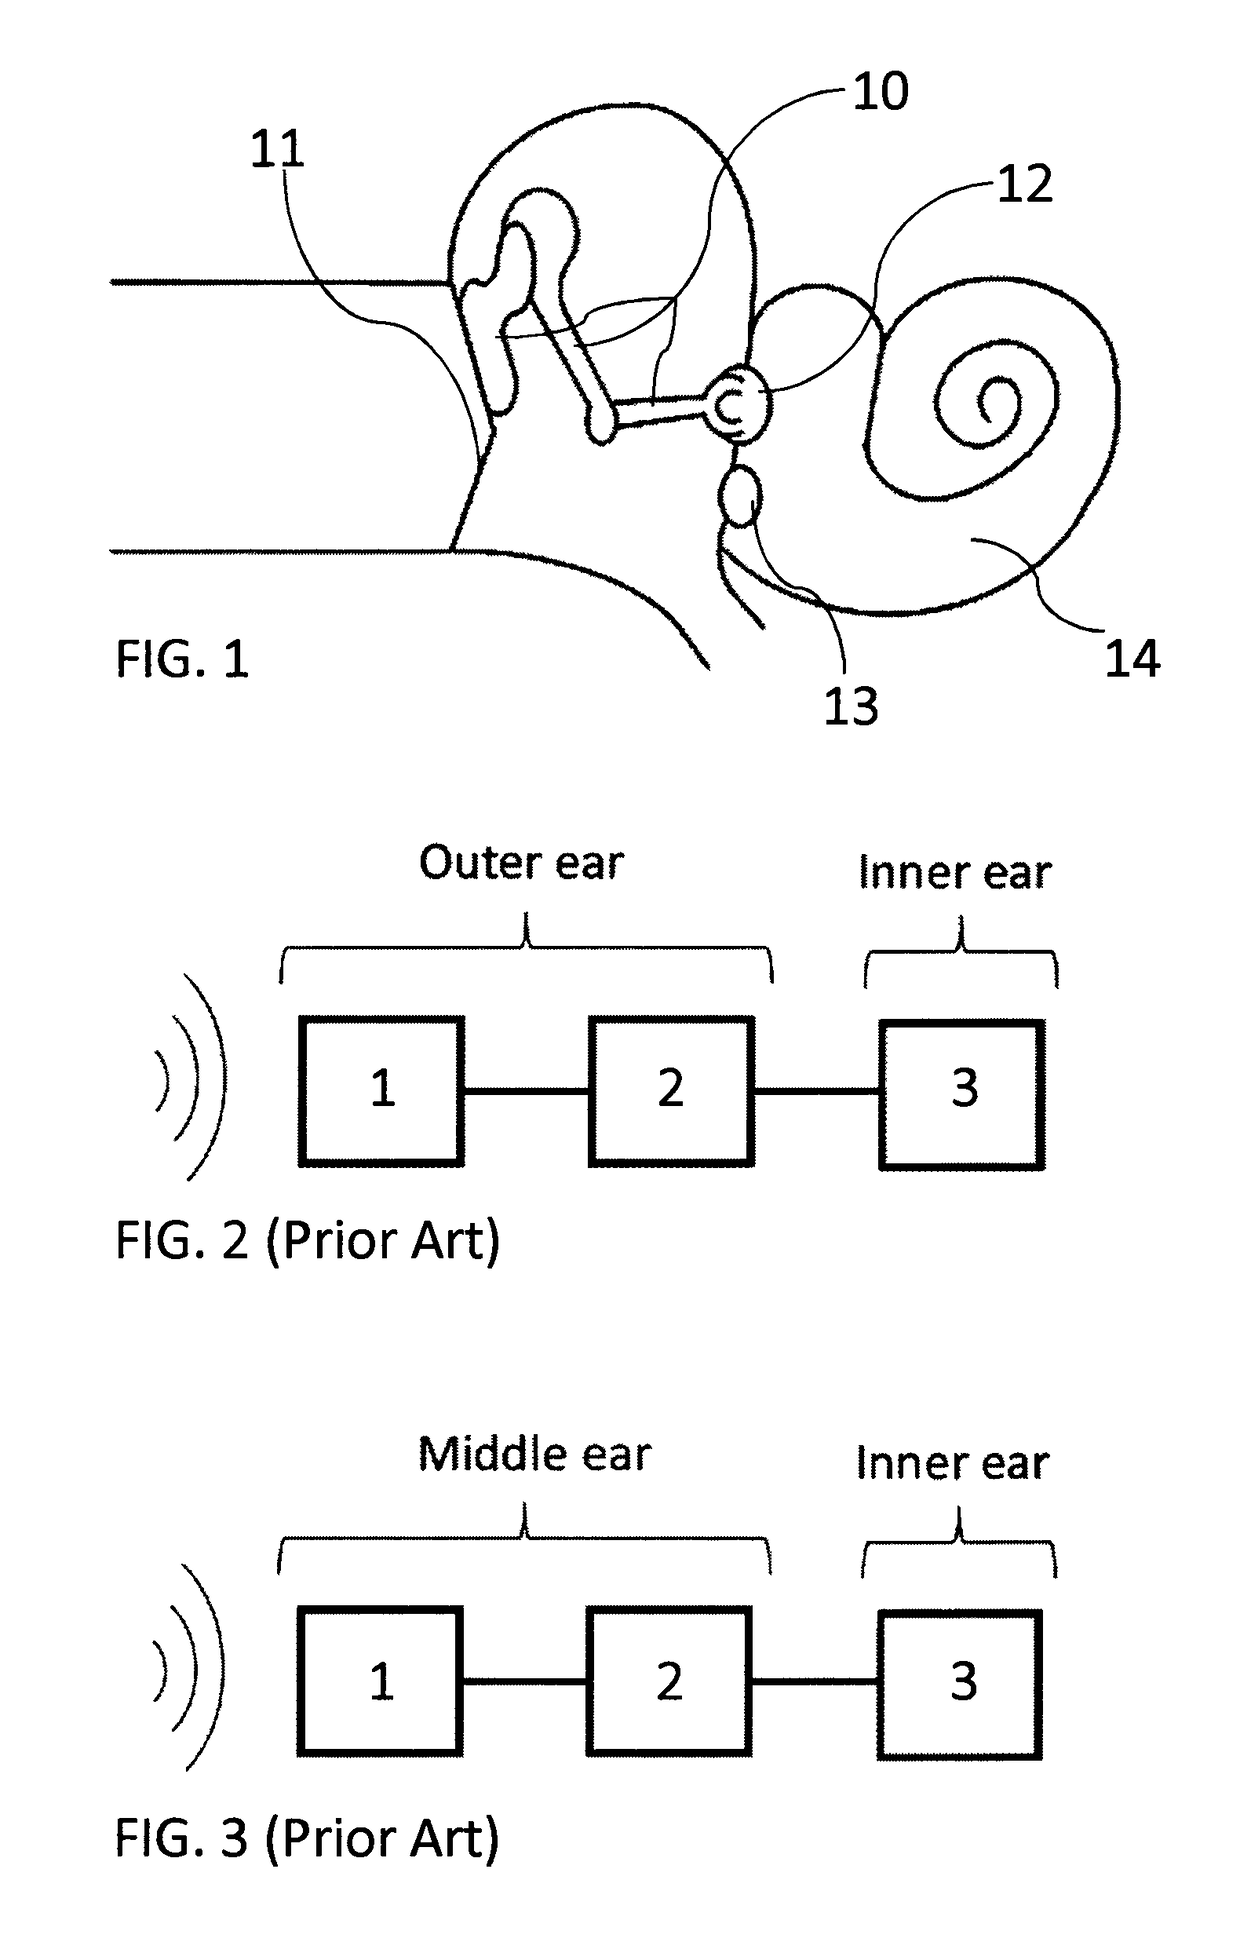 Energy harvesting cochlear implant